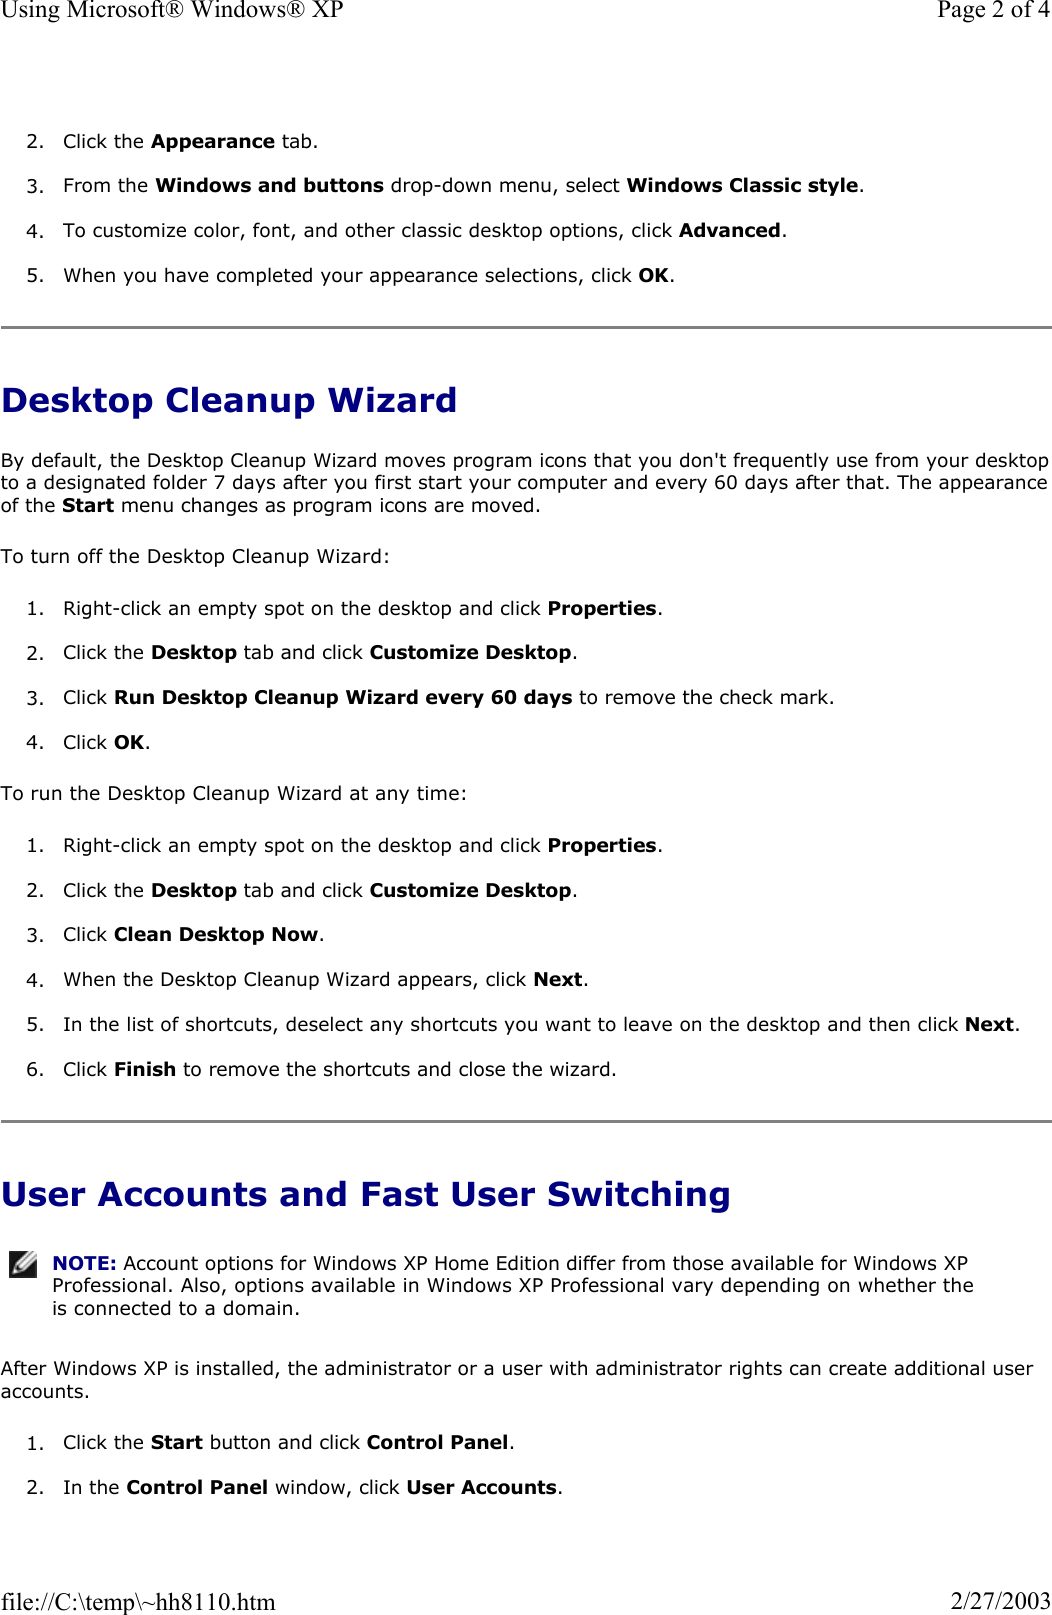 2. Click the Appearance tab.  3. From the Windows and buttons drop-down menu, select Windows Classic style.4. To customize color, font, and other classic desktop options, click Advanced.5. When you have completed your appearance selections, click OK.Desktop Cleanup Wizard By default, the Desktop Cleanup Wizard moves program icons that you don&apos;t frequently use from your desktopto a designated folder 7 days after you first start your computer and every 60 days after that. The appearanceof the Start menu changes as program icons are moved.  To turn off the Desktop Cleanup Wizard: 1. Right-click an empty spot on the desktop and click Properties.2. Click the Desktop tab and click Customize Desktop.3. Click Run Desktop Cleanup Wizard every 60 days to remove the check mark. 4. Click OK.To run the Desktop Cleanup Wizard at any time: 1. Right-click an empty spot on the desktop and click Properties.2. Click the Desktop tab and click Customize Desktop.3. Click Clean Desktop Now.4. When the Desktop Cleanup Wizard appears, click Next.5. In the list of shortcuts, deselect any shortcuts you want to leave on the desktop and then click Next.6. Click Finish to remove the shortcuts and close the wizard. User Accounts and Fast User Switching After Windows XP is installed, the administrator or a user with administrator rights can create additional user accounts.1. Click the Start button and click Control Panel.2. In the Control Panel window, click User Accounts.NOTE: Account options for Windows XP Home Edition differ from those available for Windows XP Professional. Also, options available in Windows XP Professional vary depending on whether the is connected to a domain.Page 2 of 4Using Microsoft® Windows® XP2/27/2003file://C:\temp\~hh8110.htm